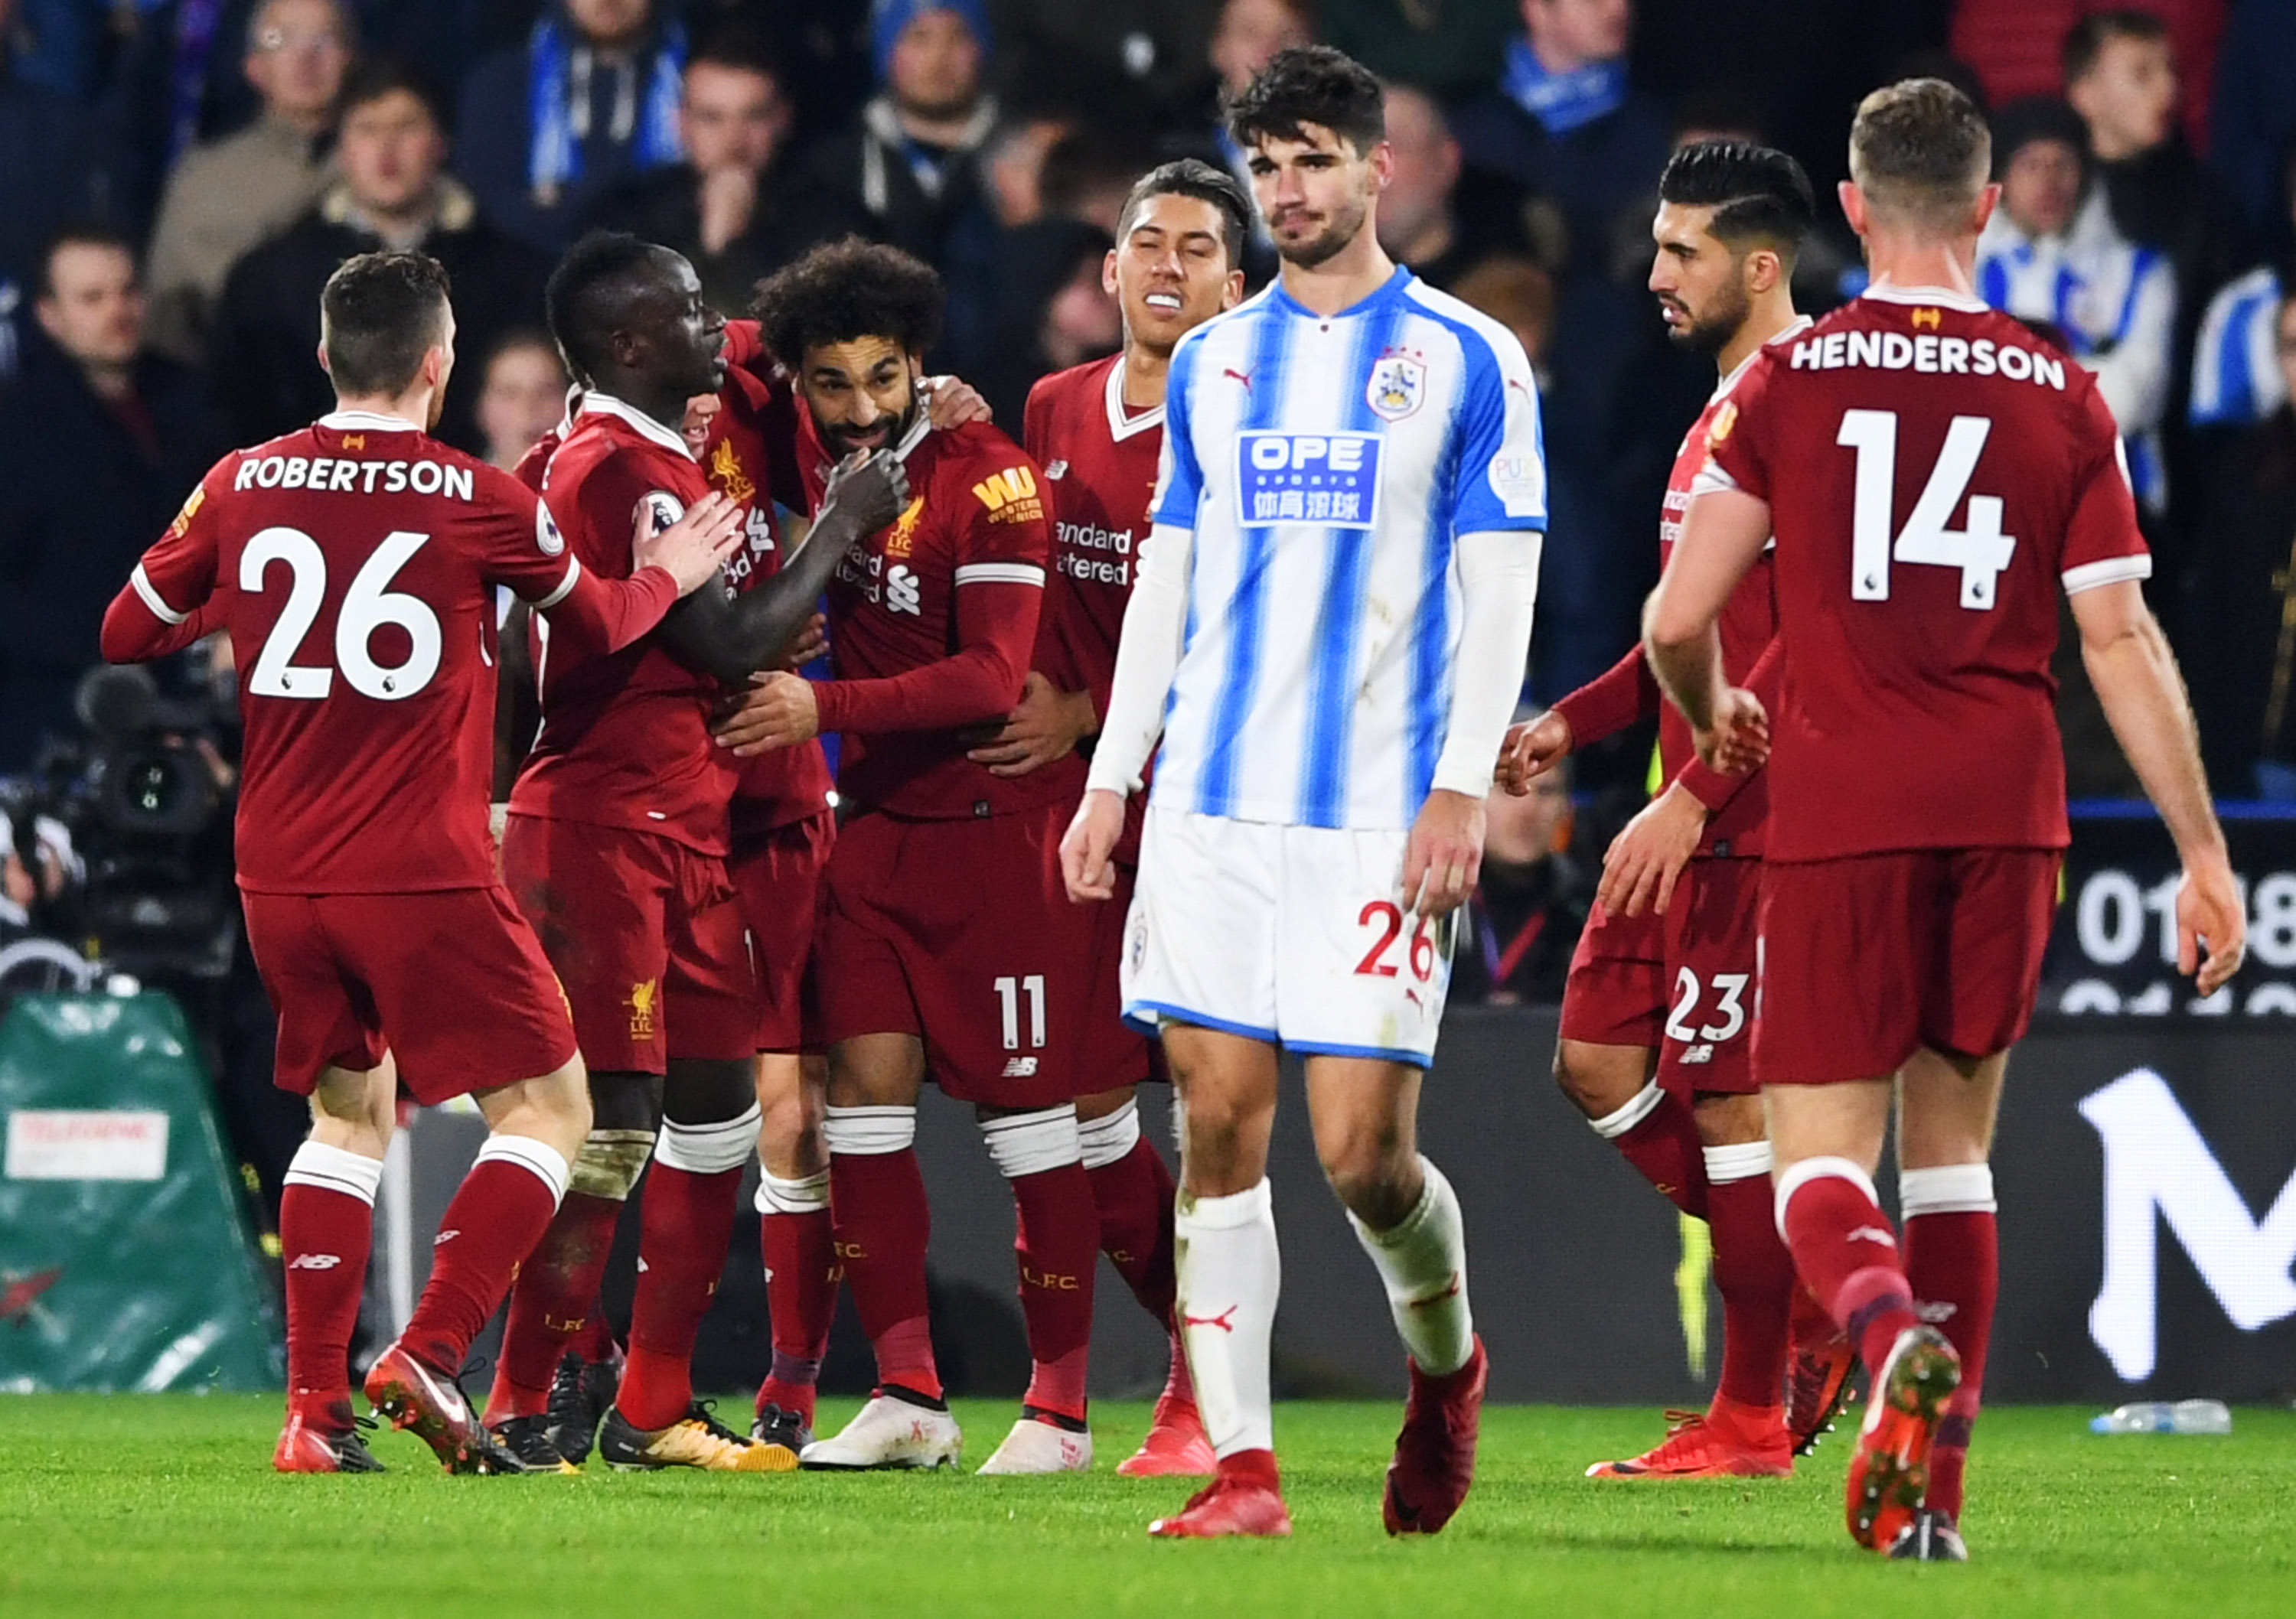 HUDDERSFIELD, ENGLAND - JANUARY 30:  Mohamed Salah of Liverpool (11) celebrates as he scores their third goal from the penalty spot with team mates during the Premier League match between Huddersfield Town and Liverpool at John Smith's Stadium on January 30, 2018 in Huddersfield, England.  (Photo by Gareth Copley/Getty Images)